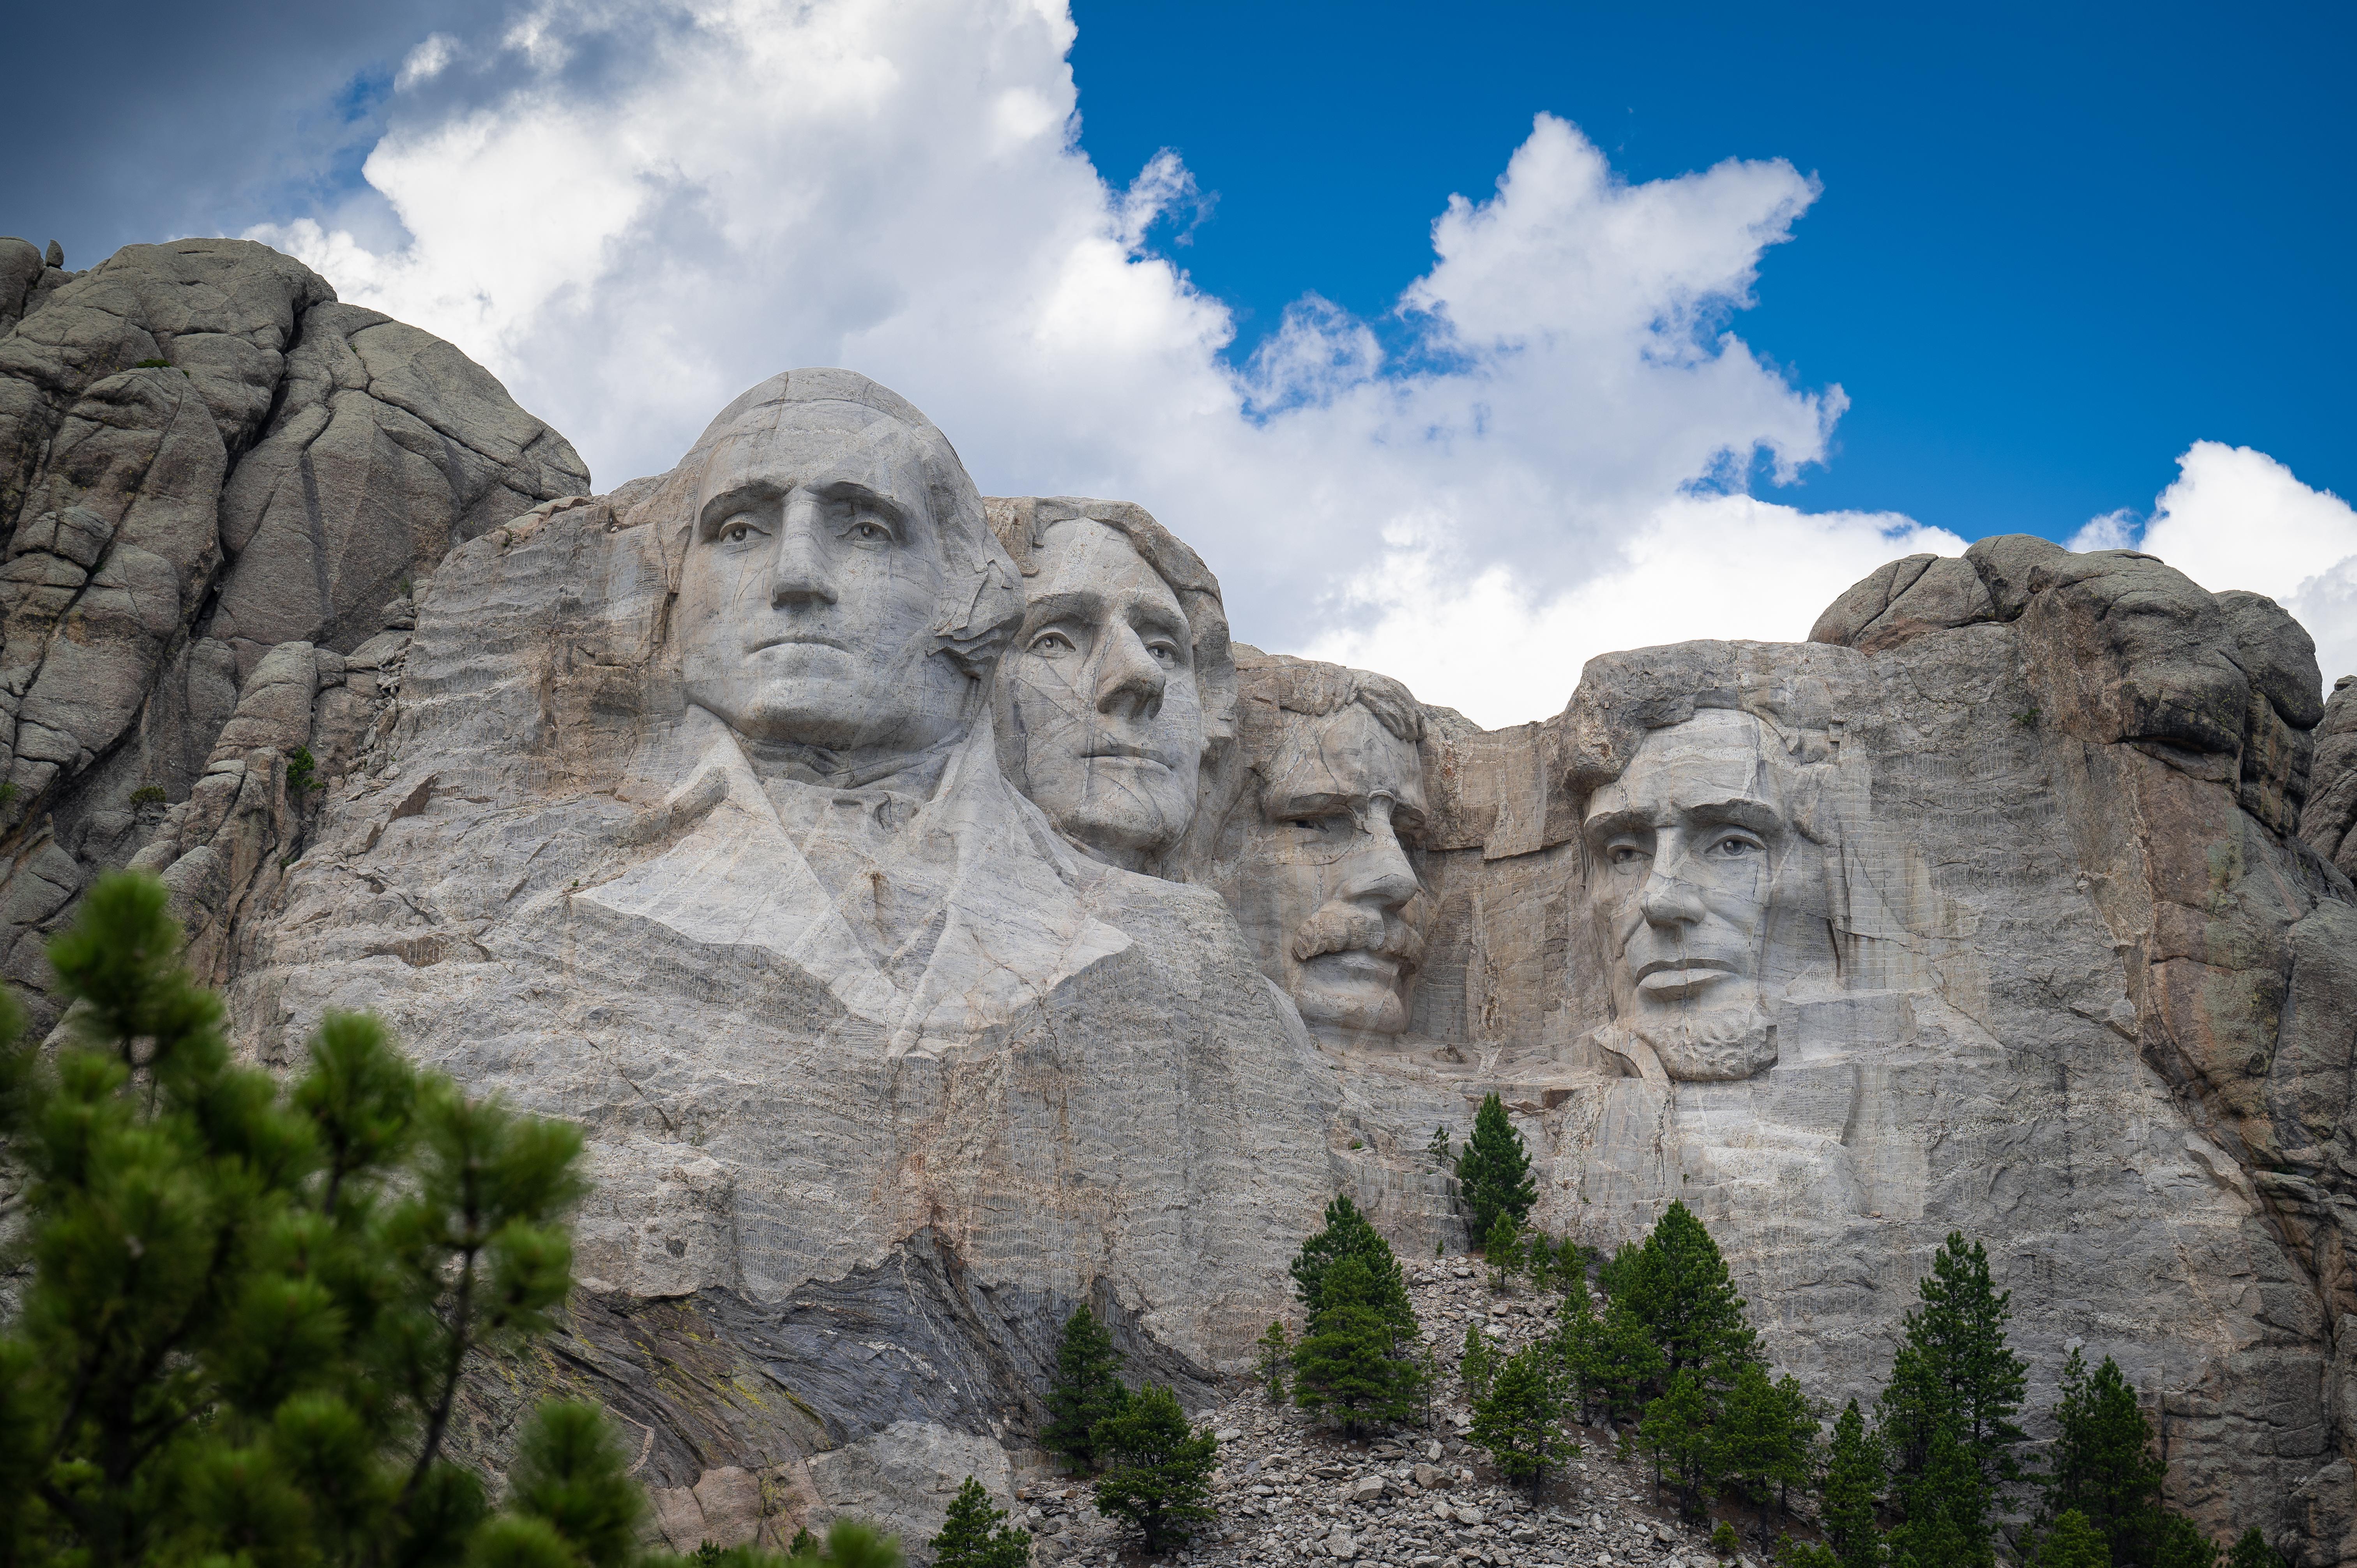 Photo of Mount Rushmore under a bright blue sky with puffy clouds floating over.